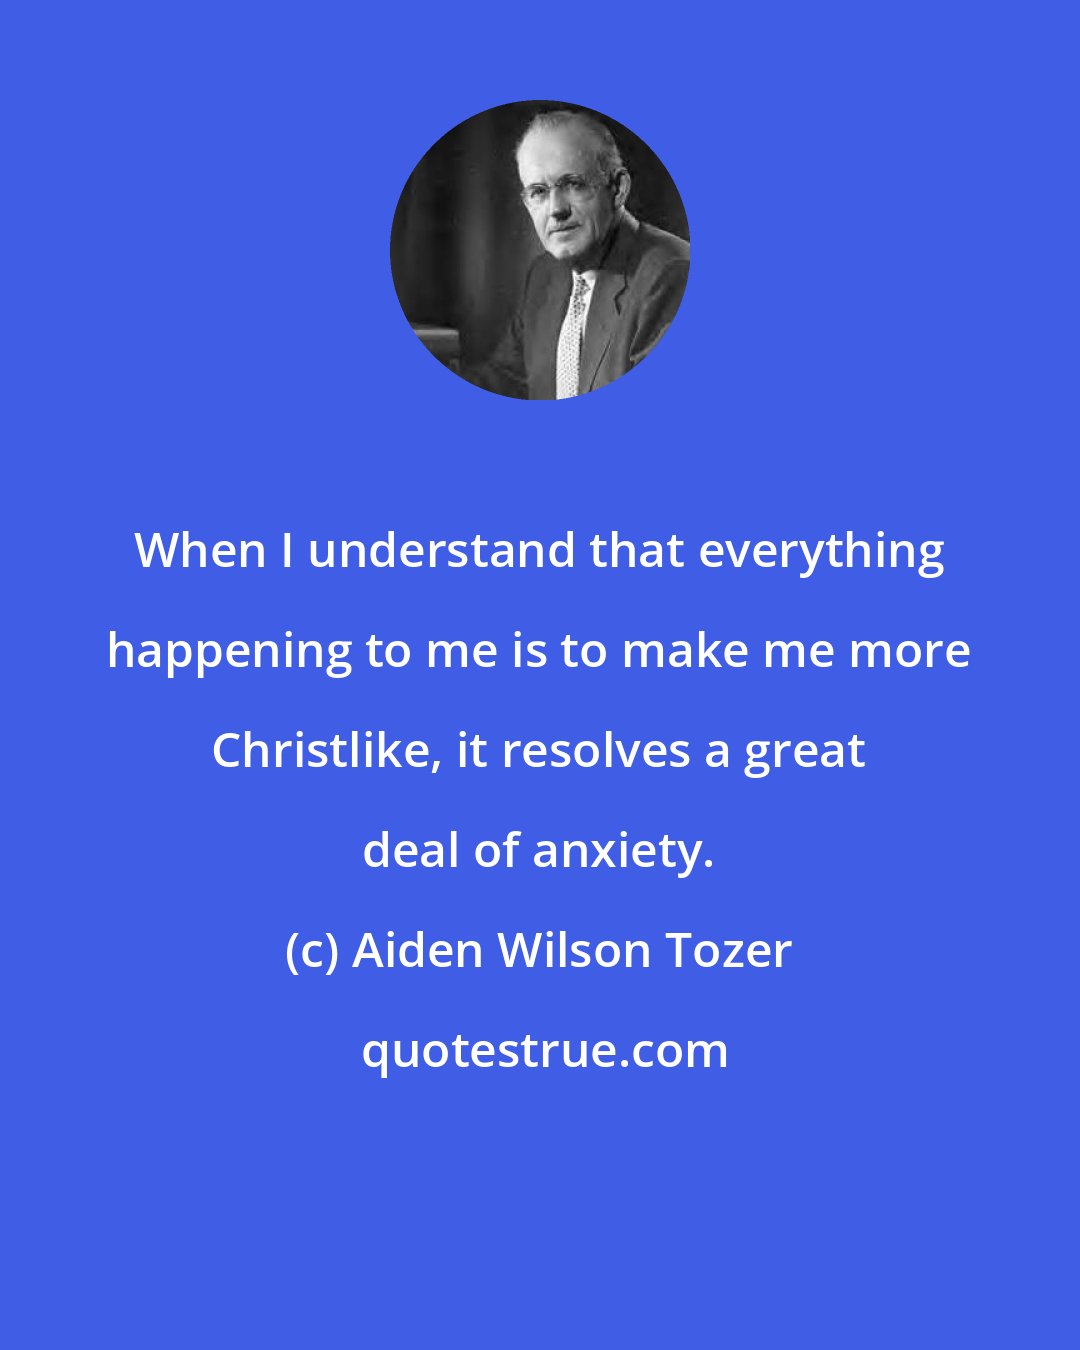 Aiden Wilson Tozer: When I understand that everything happening to me is to make me more Christlike, it resolves a great deal of anxiety.